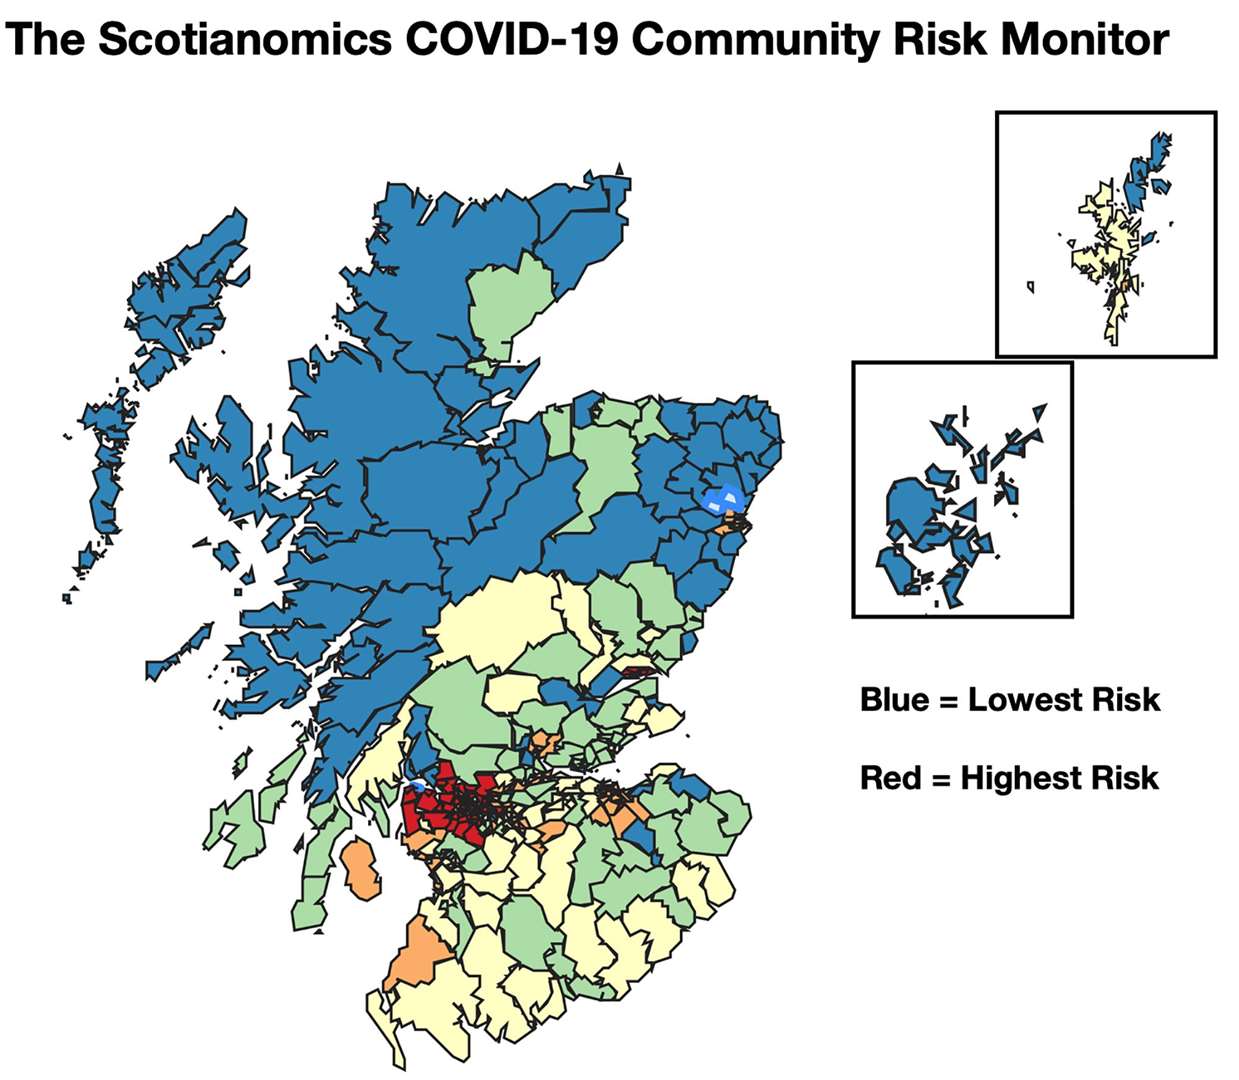 The map shows the transmission risk of coronavirus in different communities across Scotland.